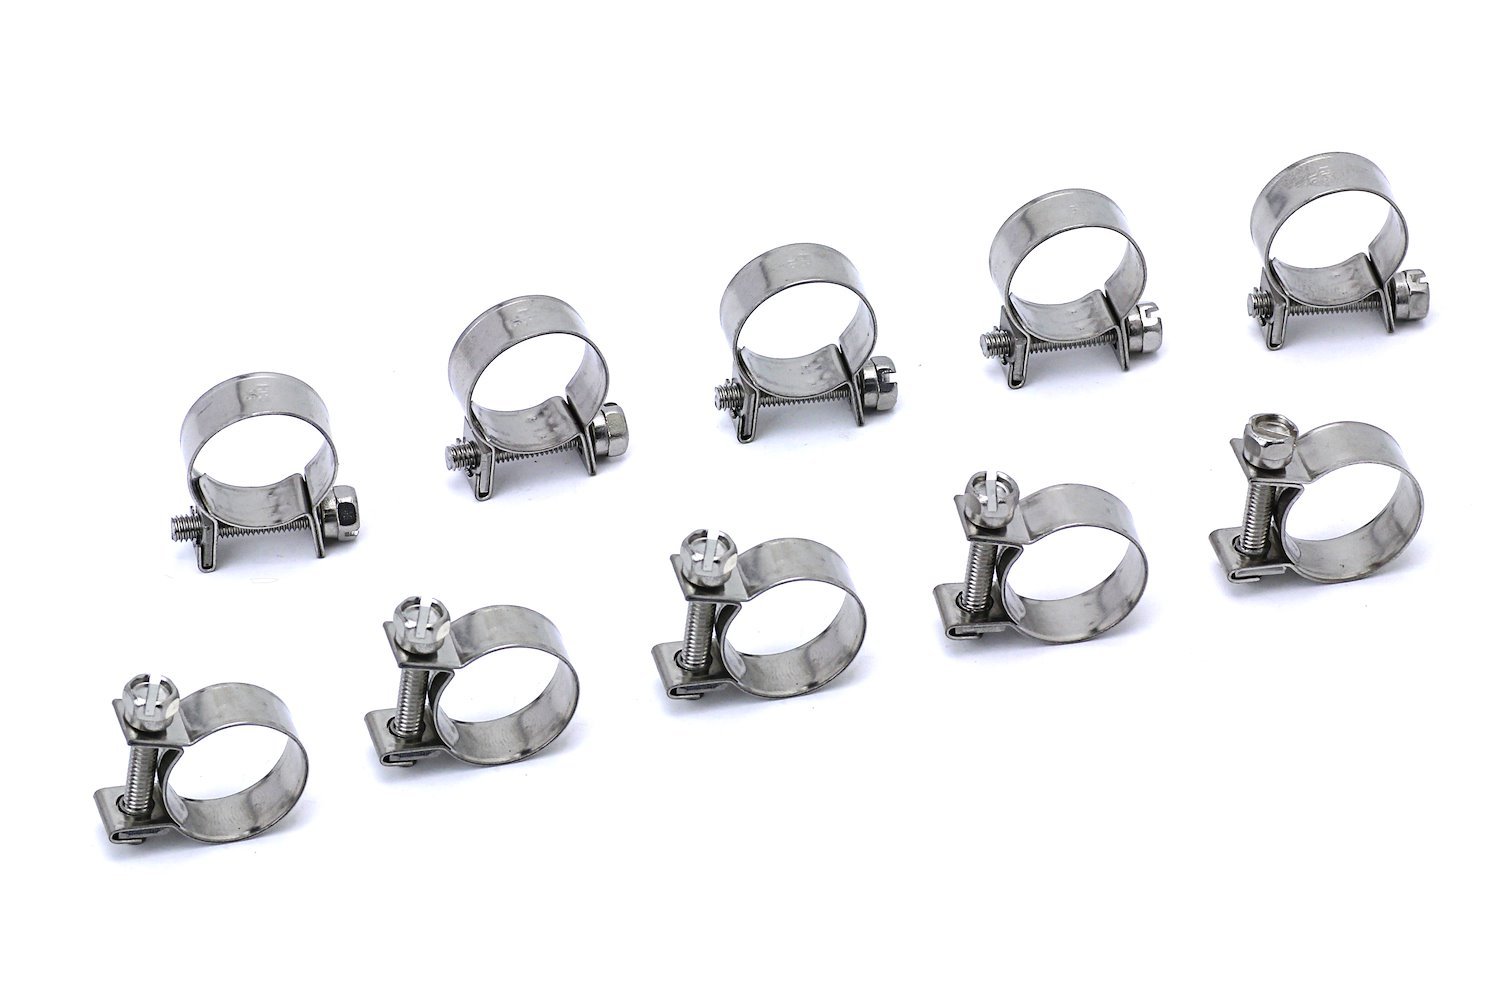 FIC-6x10 Fuel Injection Hose Clamp, 10 Stainless Steel Small Hose Clamps, SAE Size 8, 1/4 in. - 5/16 in. (6 mm-8 mm)